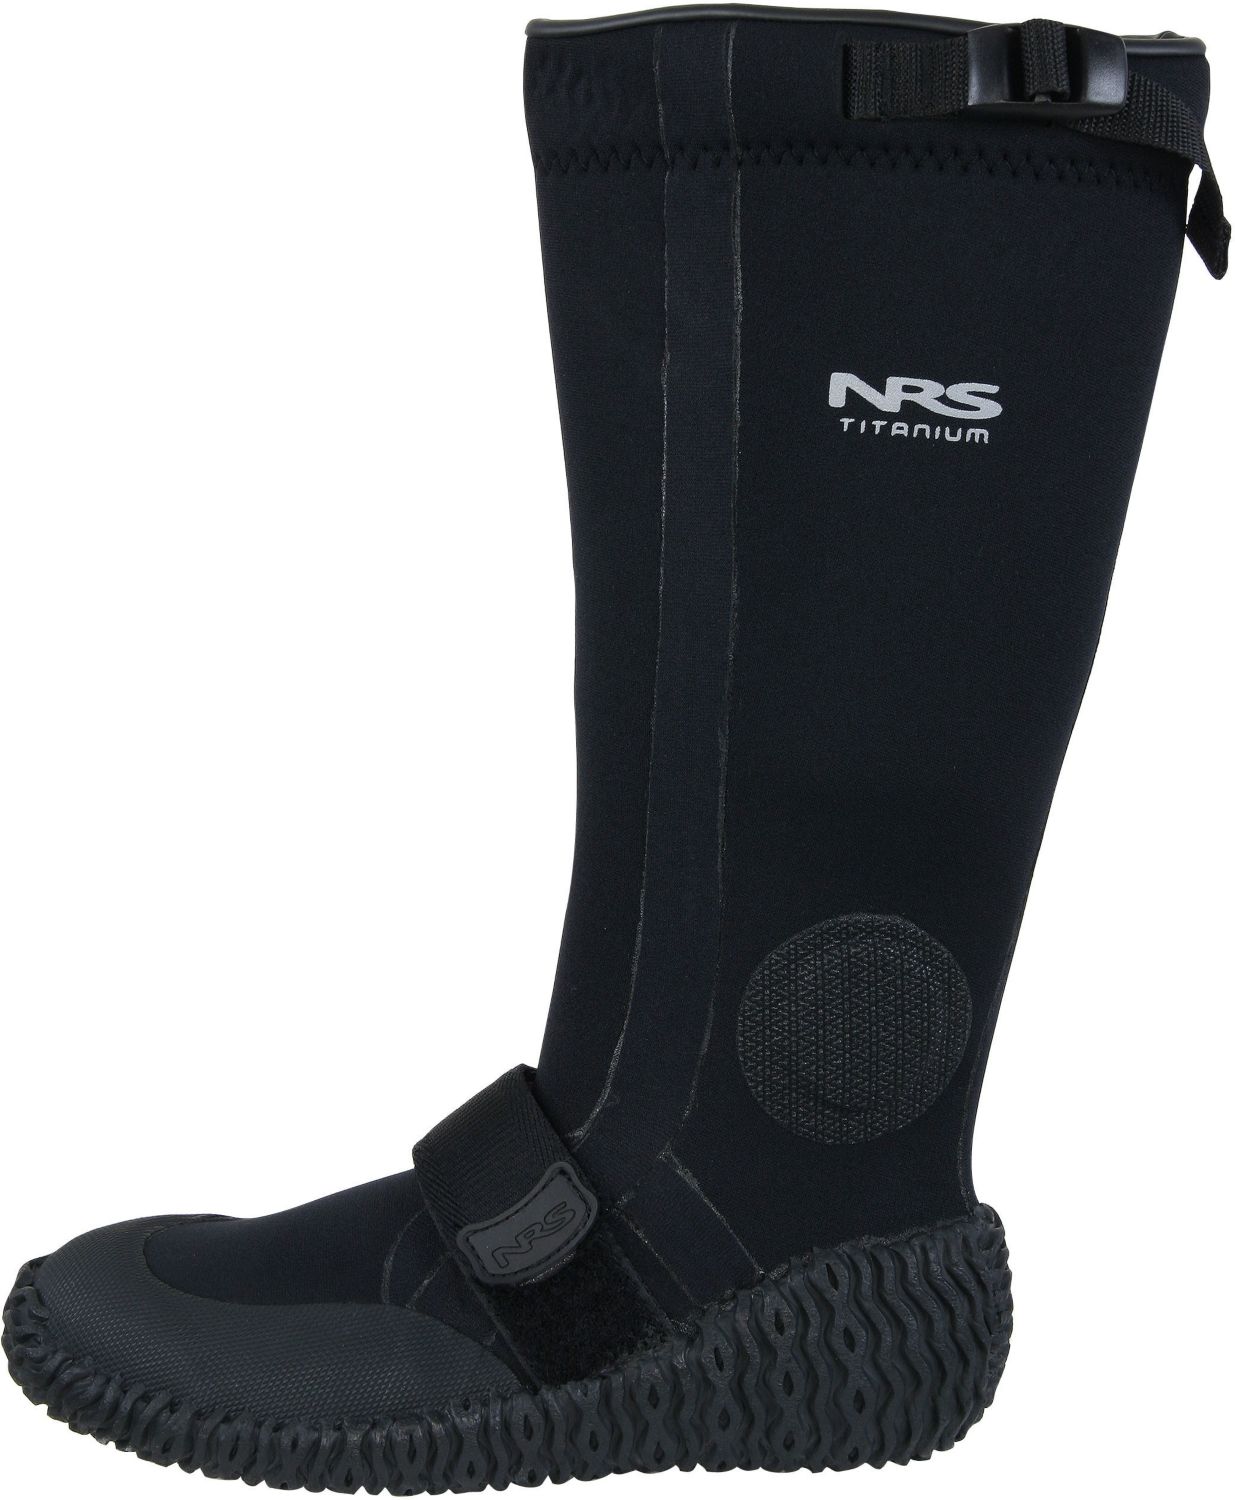 nrs boots